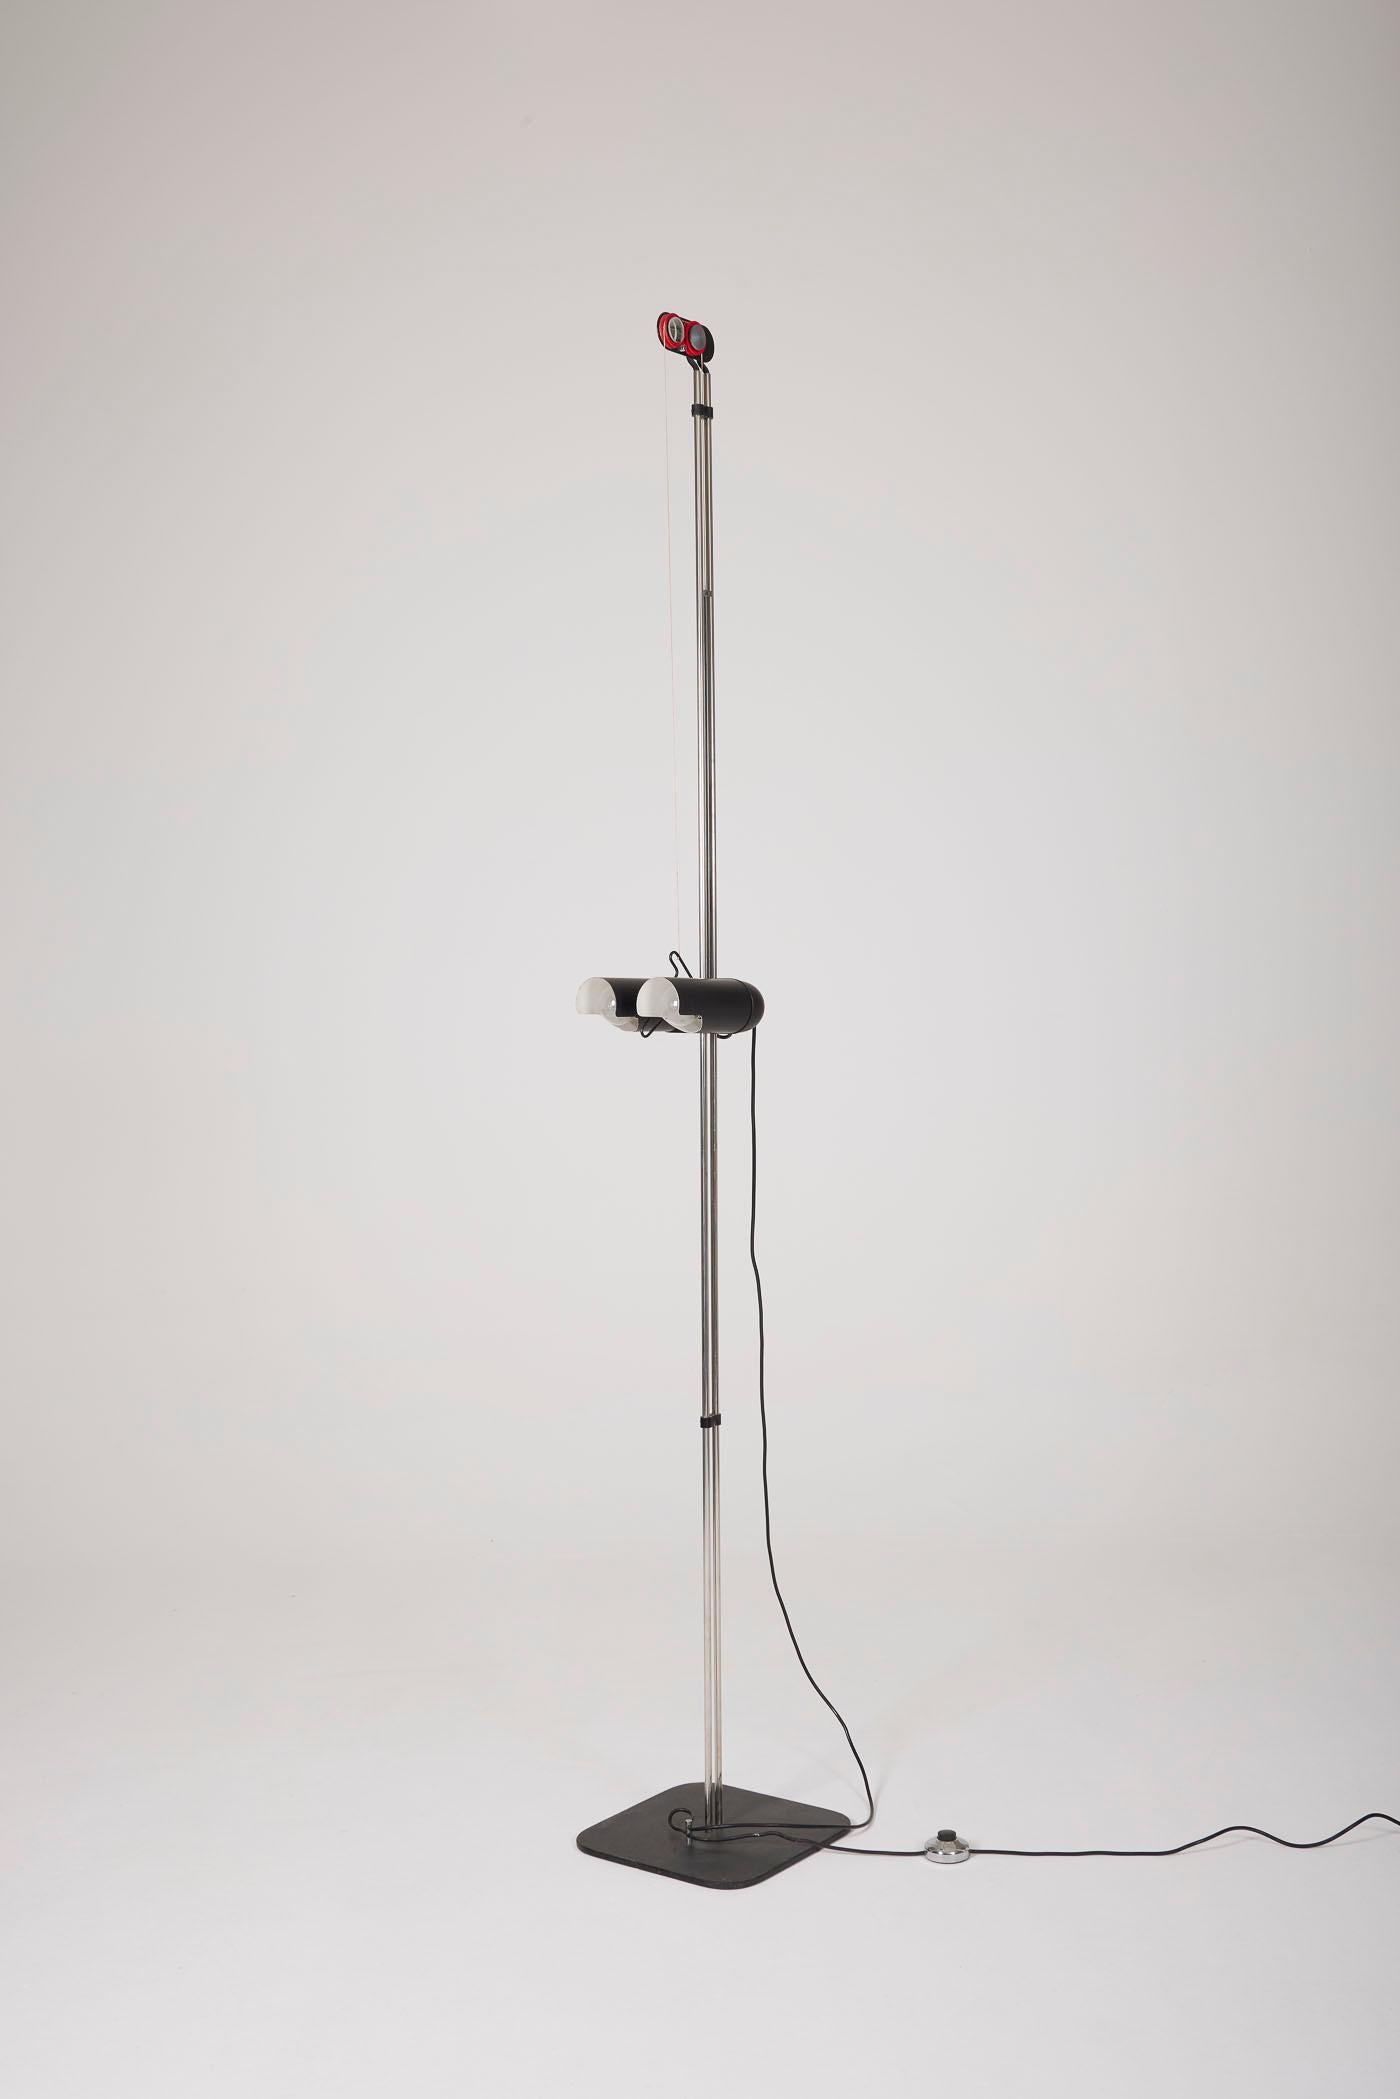 Italian floor lamp produced by Luci in the 1980s. It consists of two removable cylindrical reflectors from bottom to top on a brushed metal base. In perfect condition.
DV356